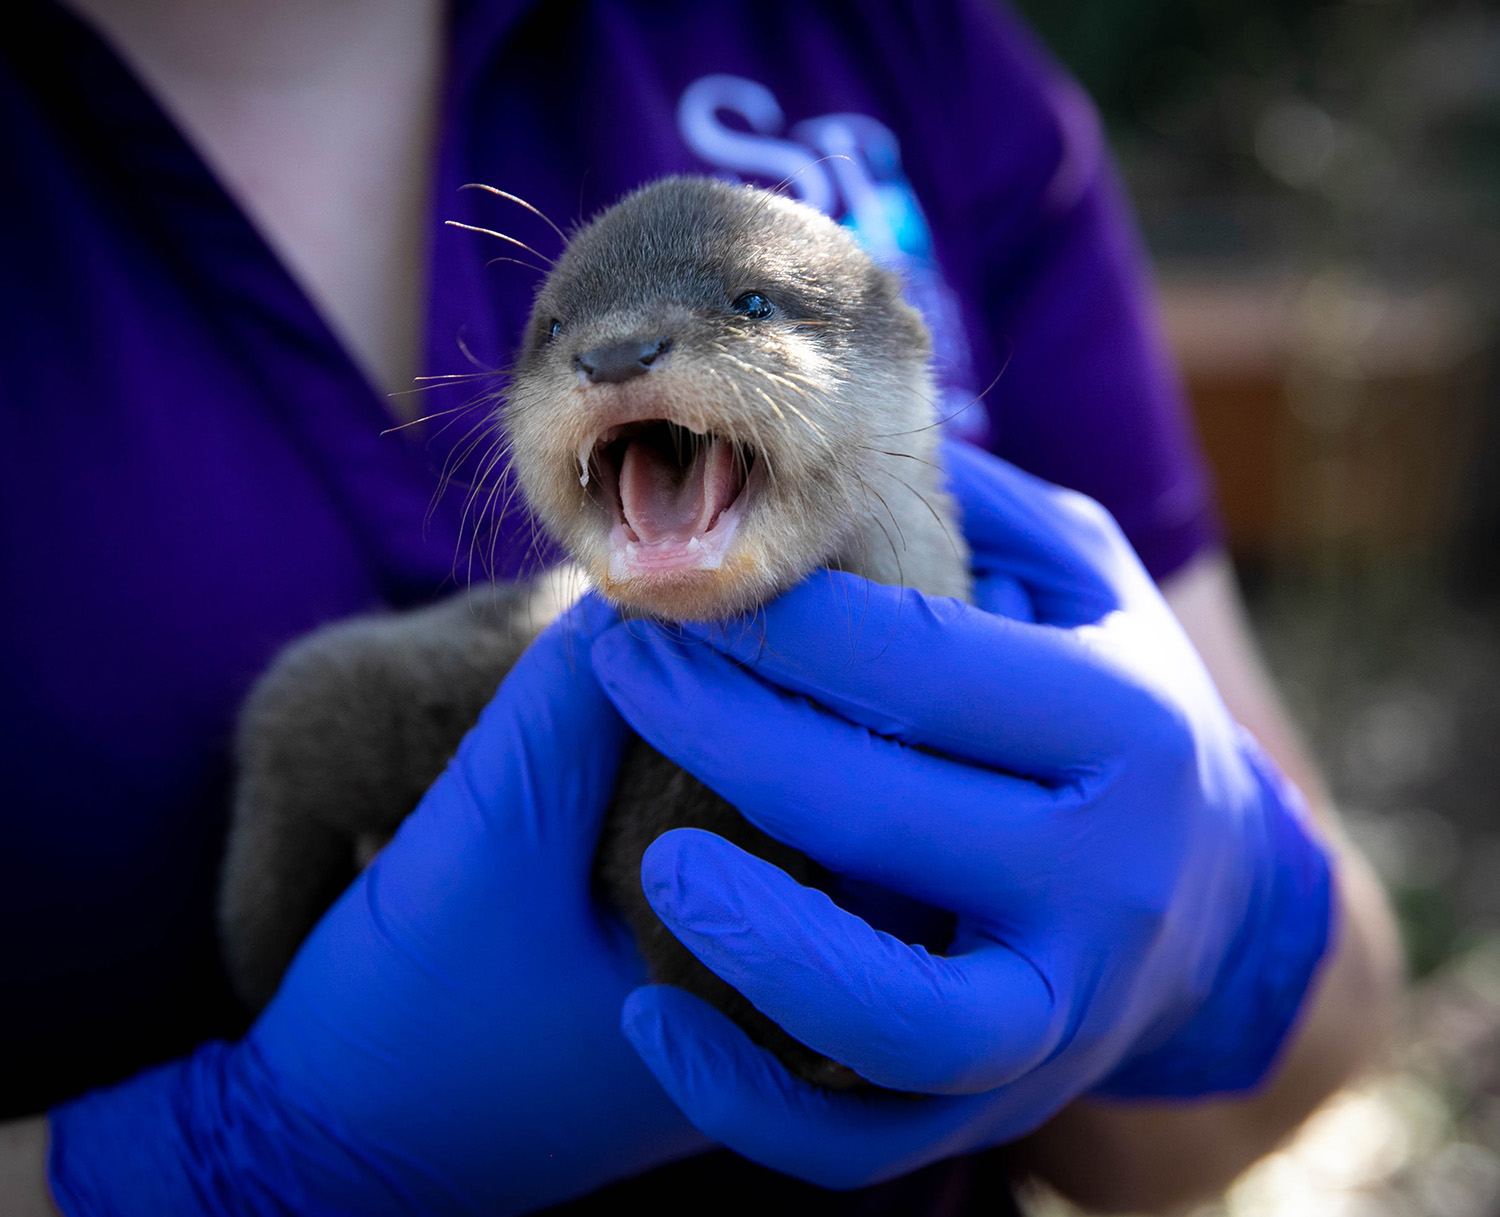 Zoo students and staff work to determine the weight and gender of five baby otters at the Santa Fe College Teaching Zoo on Jan. 15, 2020 in Gainesville, Fla.  (Matt Stamey/Santa Fe College ) ***Subjects Have Releases***